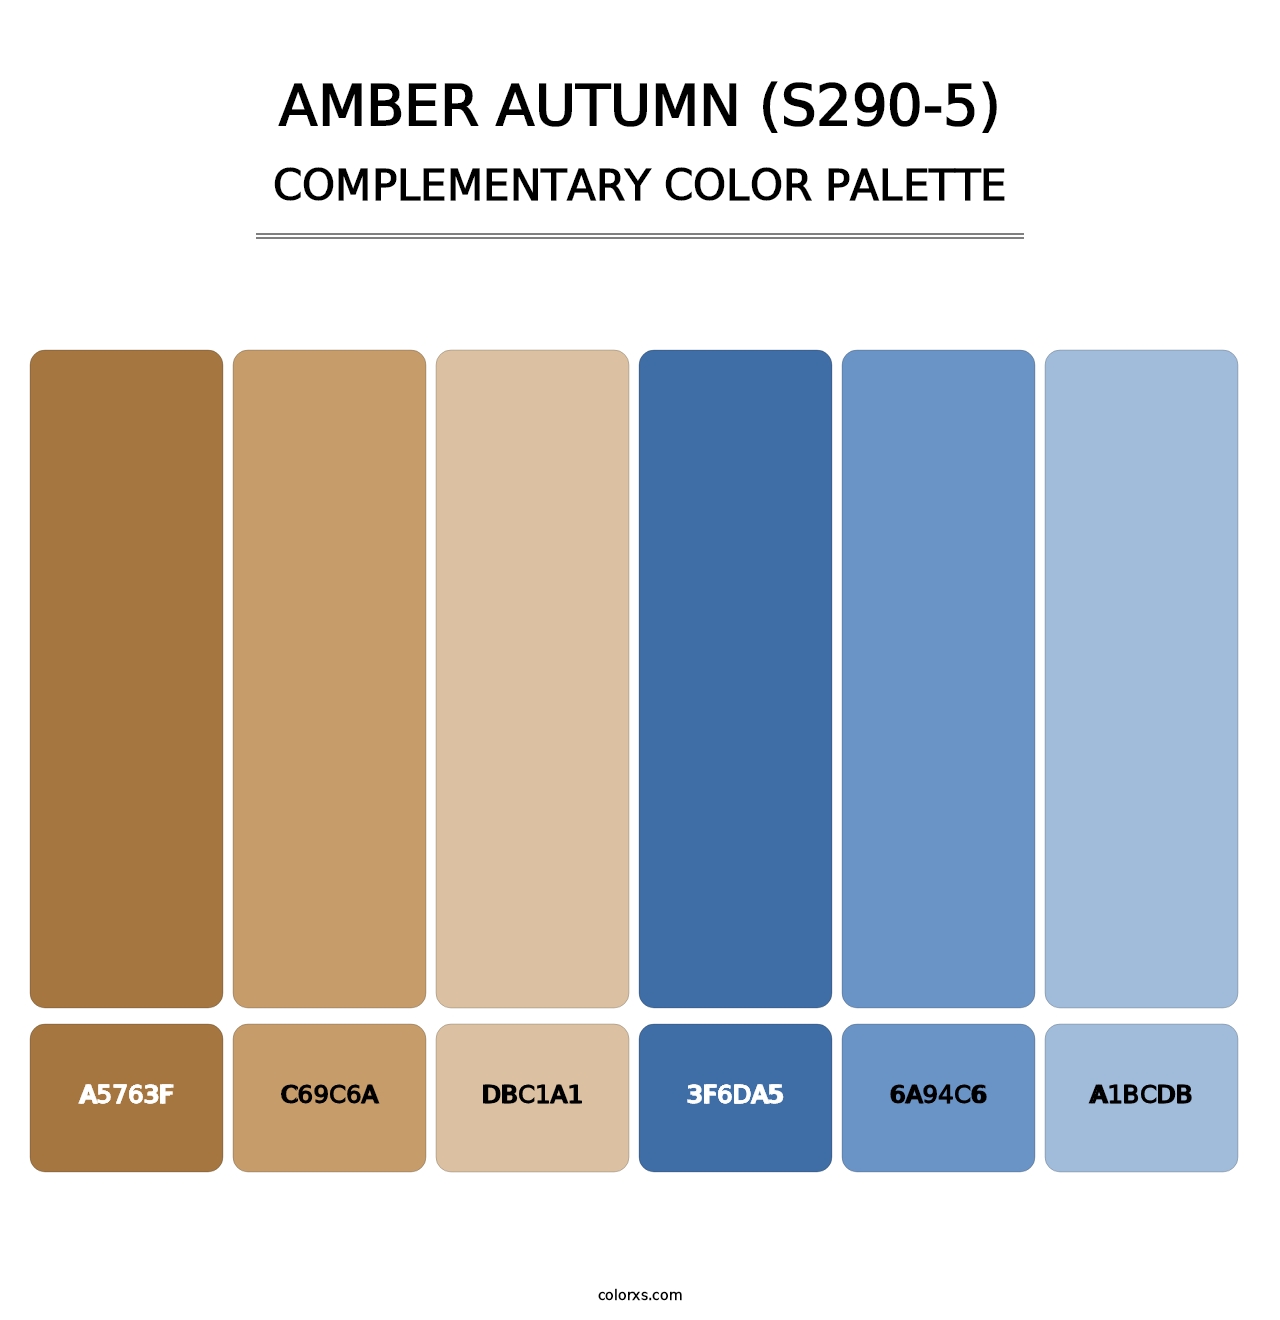 Amber Autumn (S290-5) - Complementary Color Palette